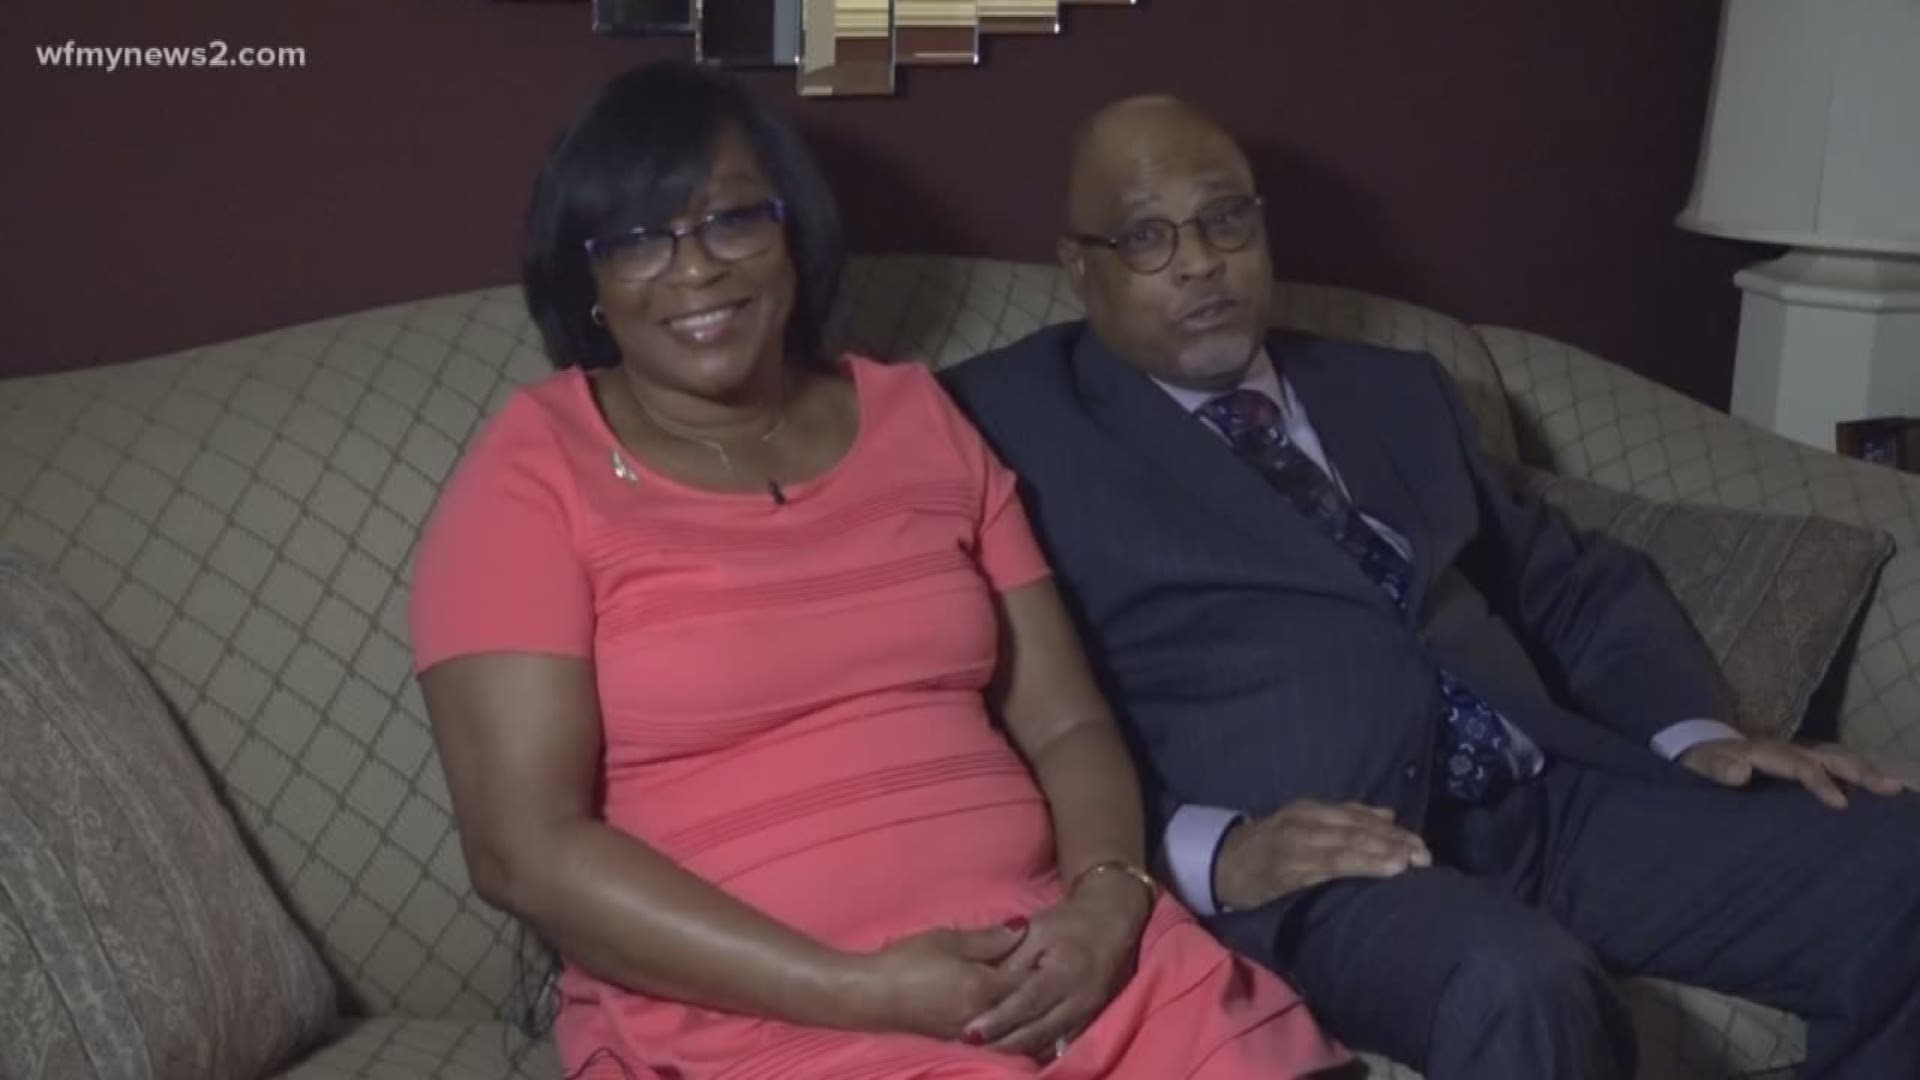 Angela met Henry Frye Jr. in 1984, and he won over her heart in 1985. Fast forward to this year - and she gave him one of her kidneys. "I guess we're joined at the hip!" Anglea says a month after donating kidney to husband Henry.